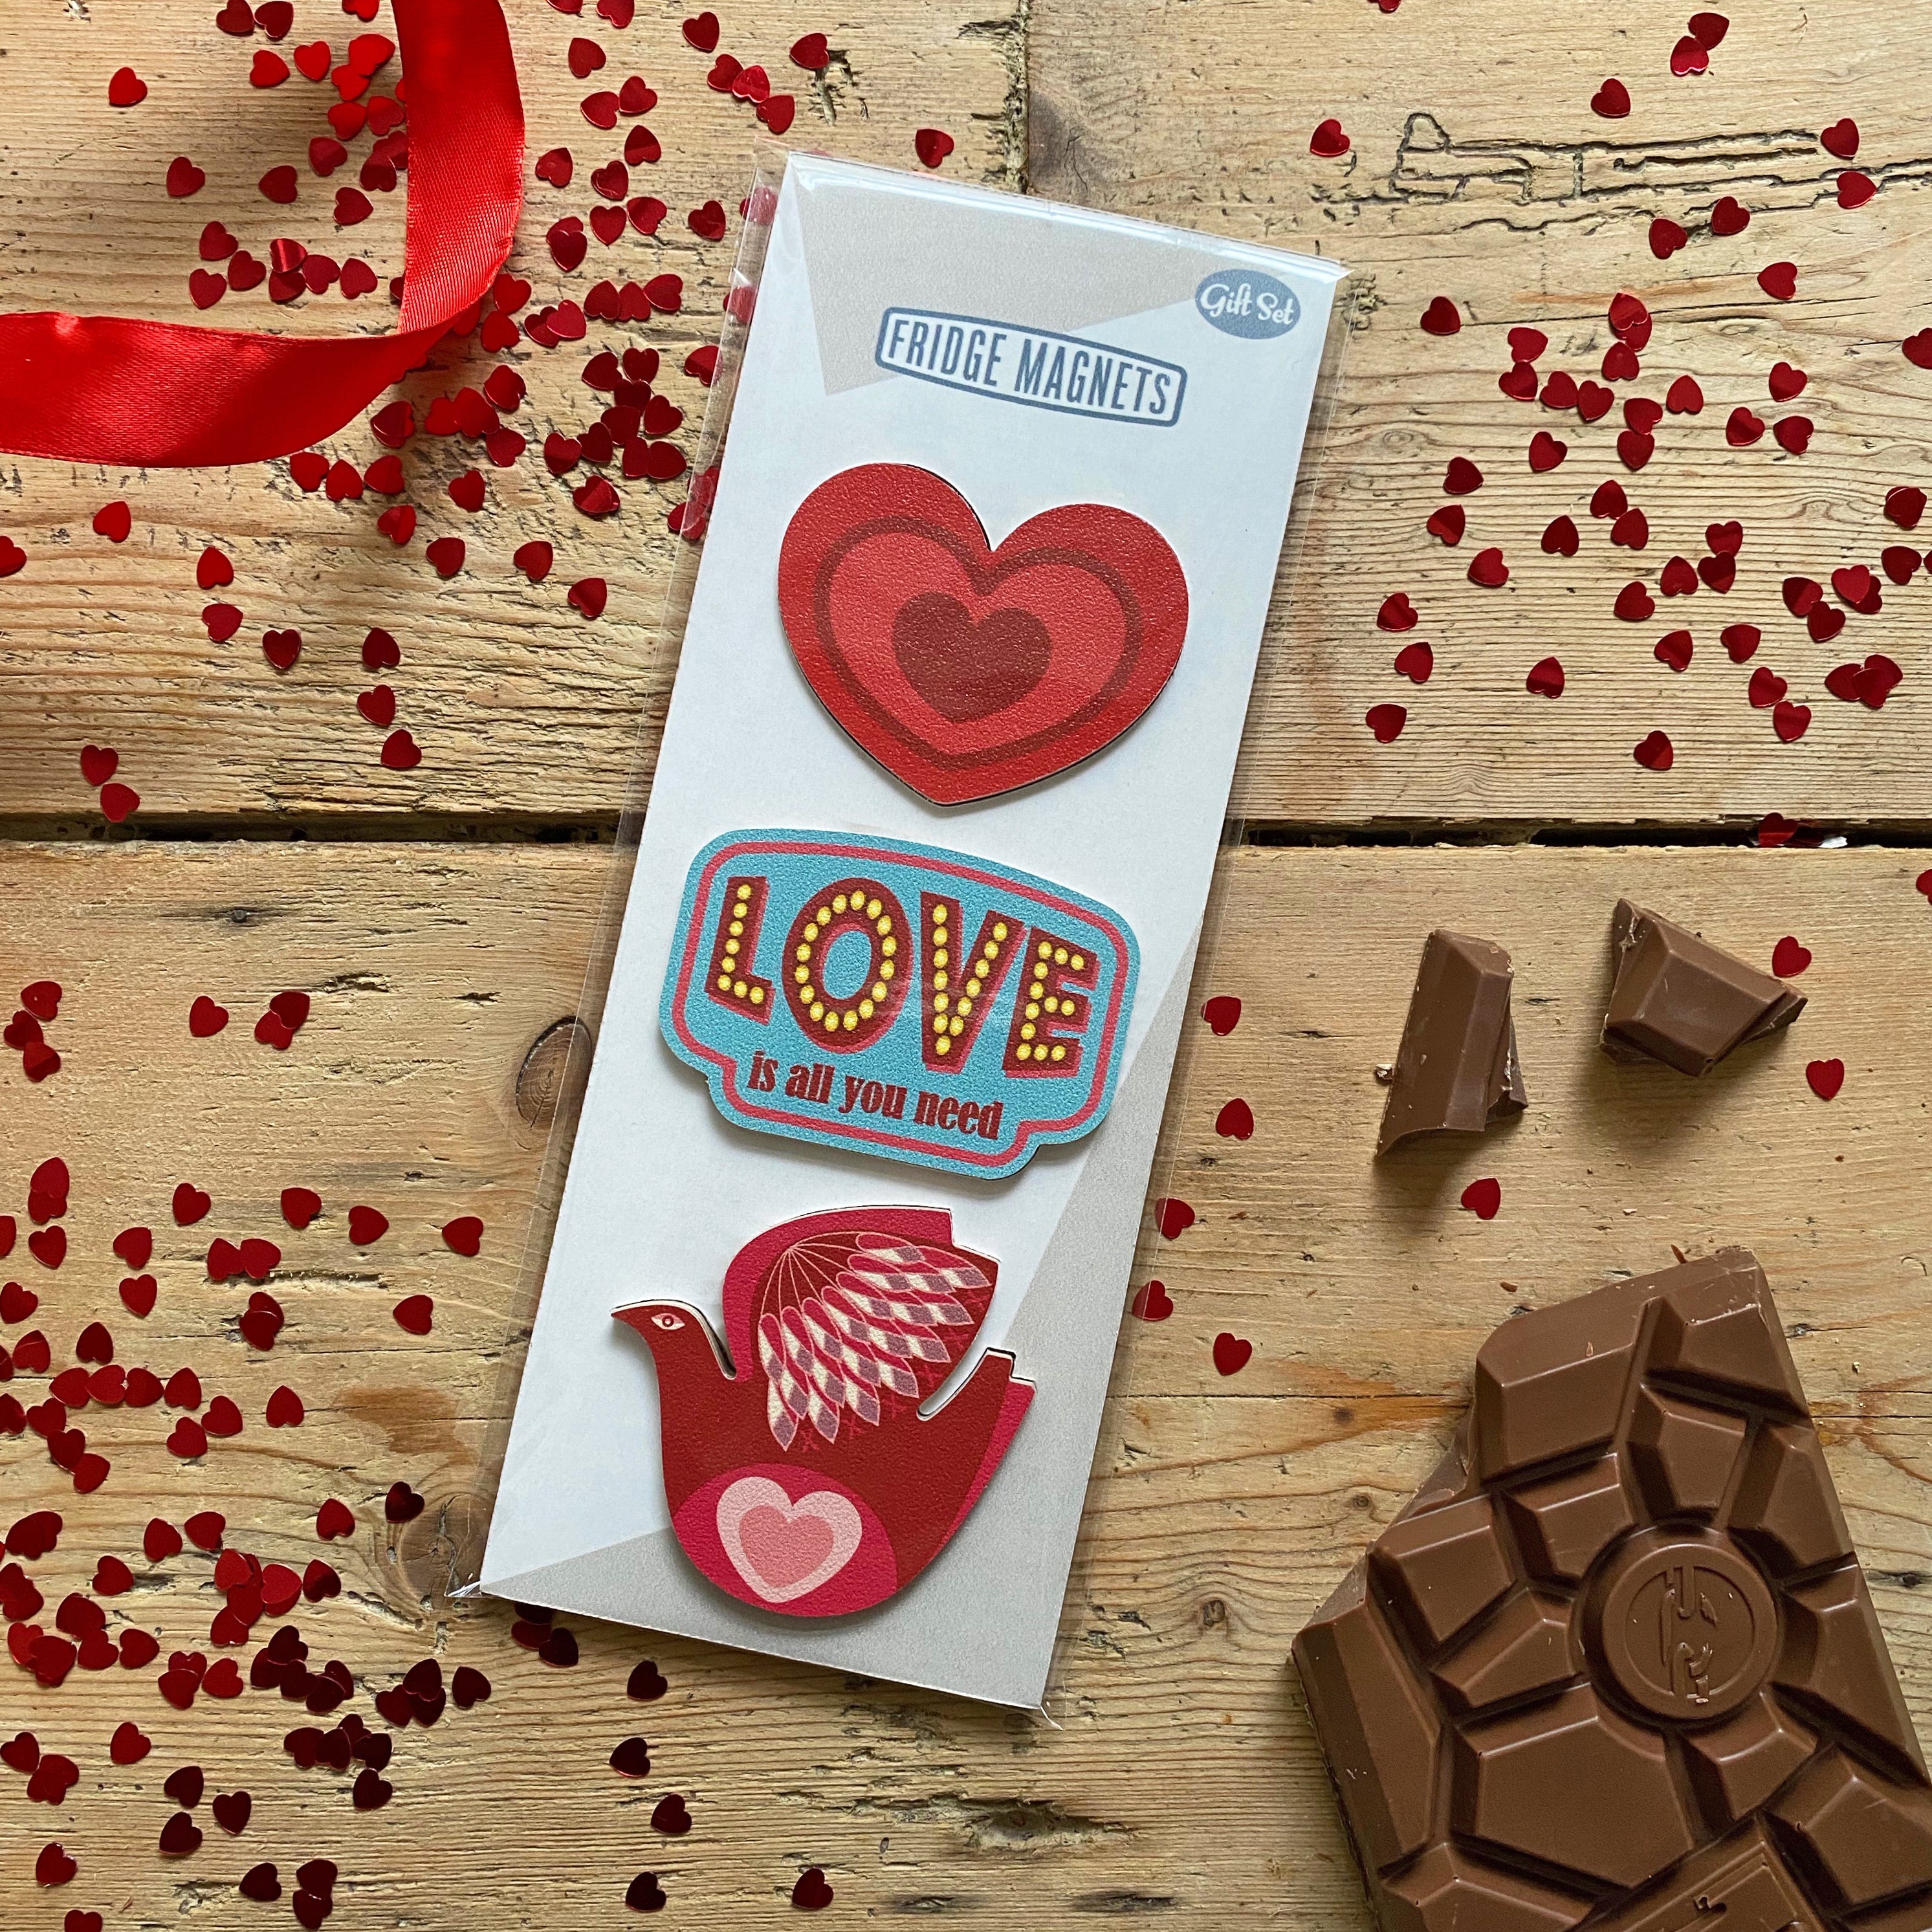 A gift set of three Fridge Magnets for Valentine's Day with heart, all you need is love vintage label and love bird magnets - by Beyond the Fridge on wood with chocolate and red ribbon